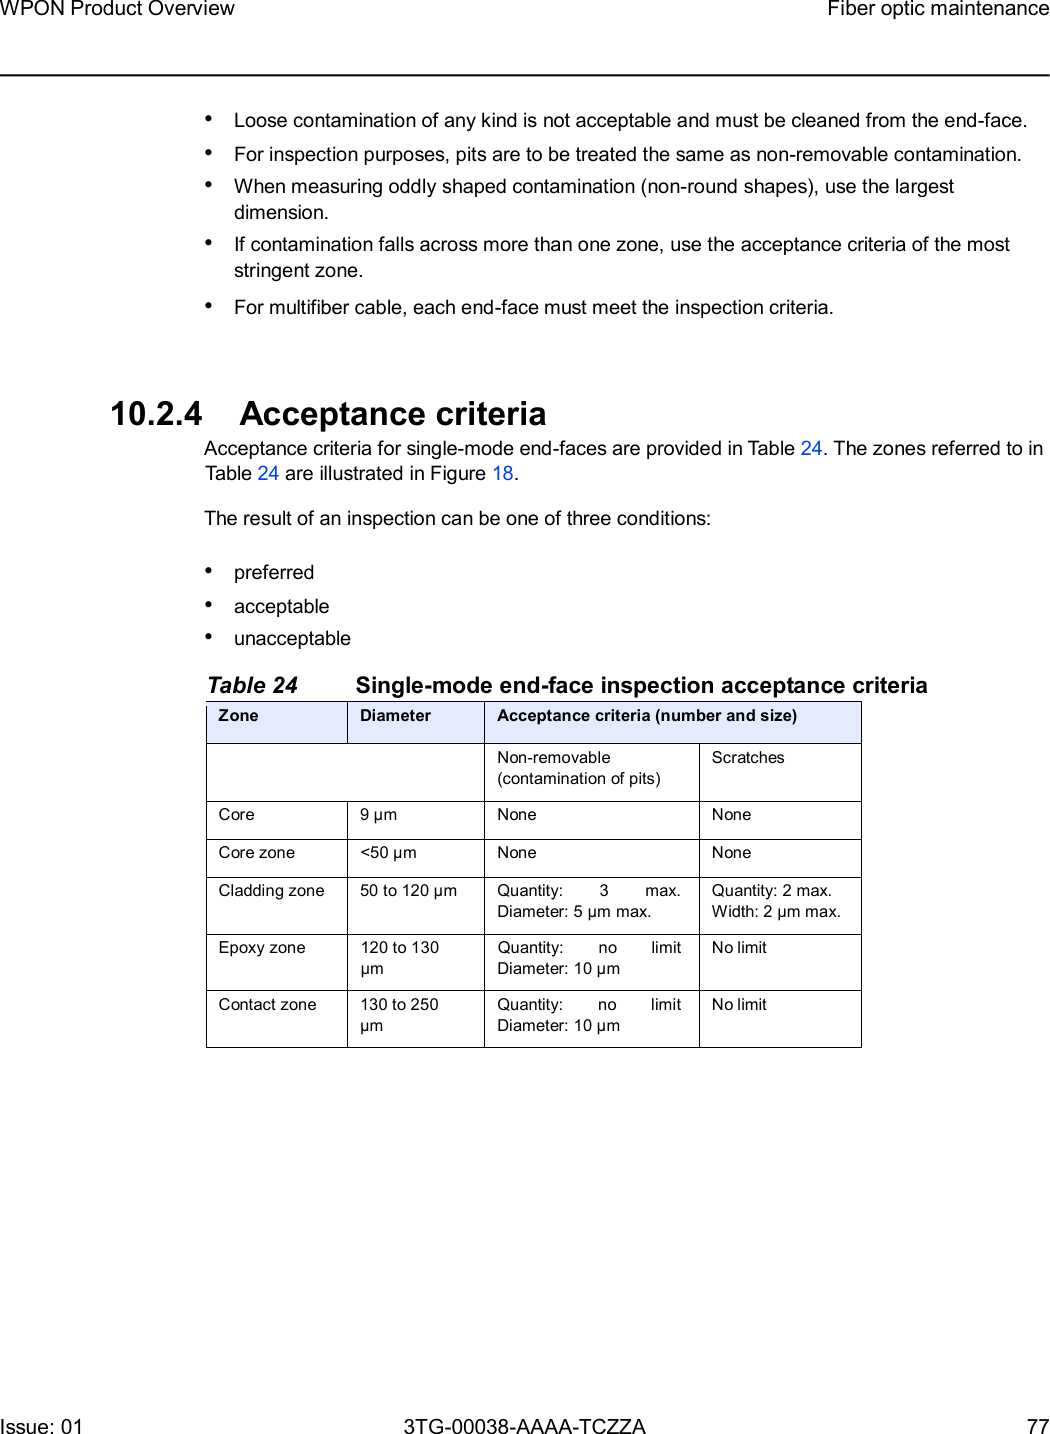 Page 77 of Nokia Bell 7577WPONAPAC WPON User Manual WPON Product Overview